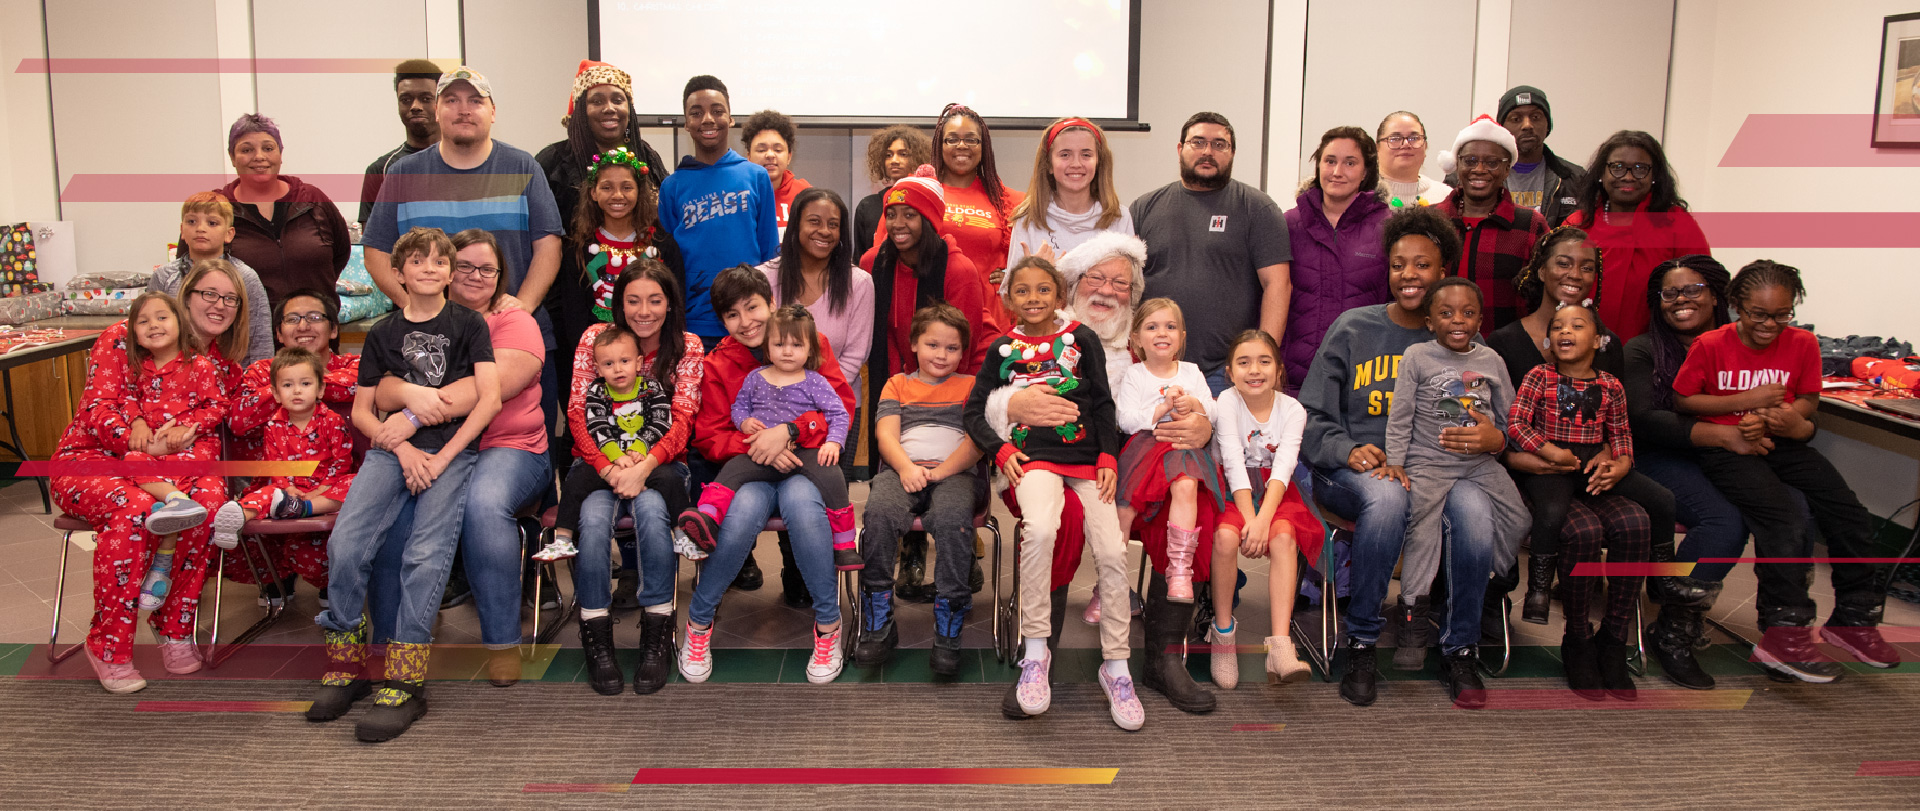 Students with Children holiday party